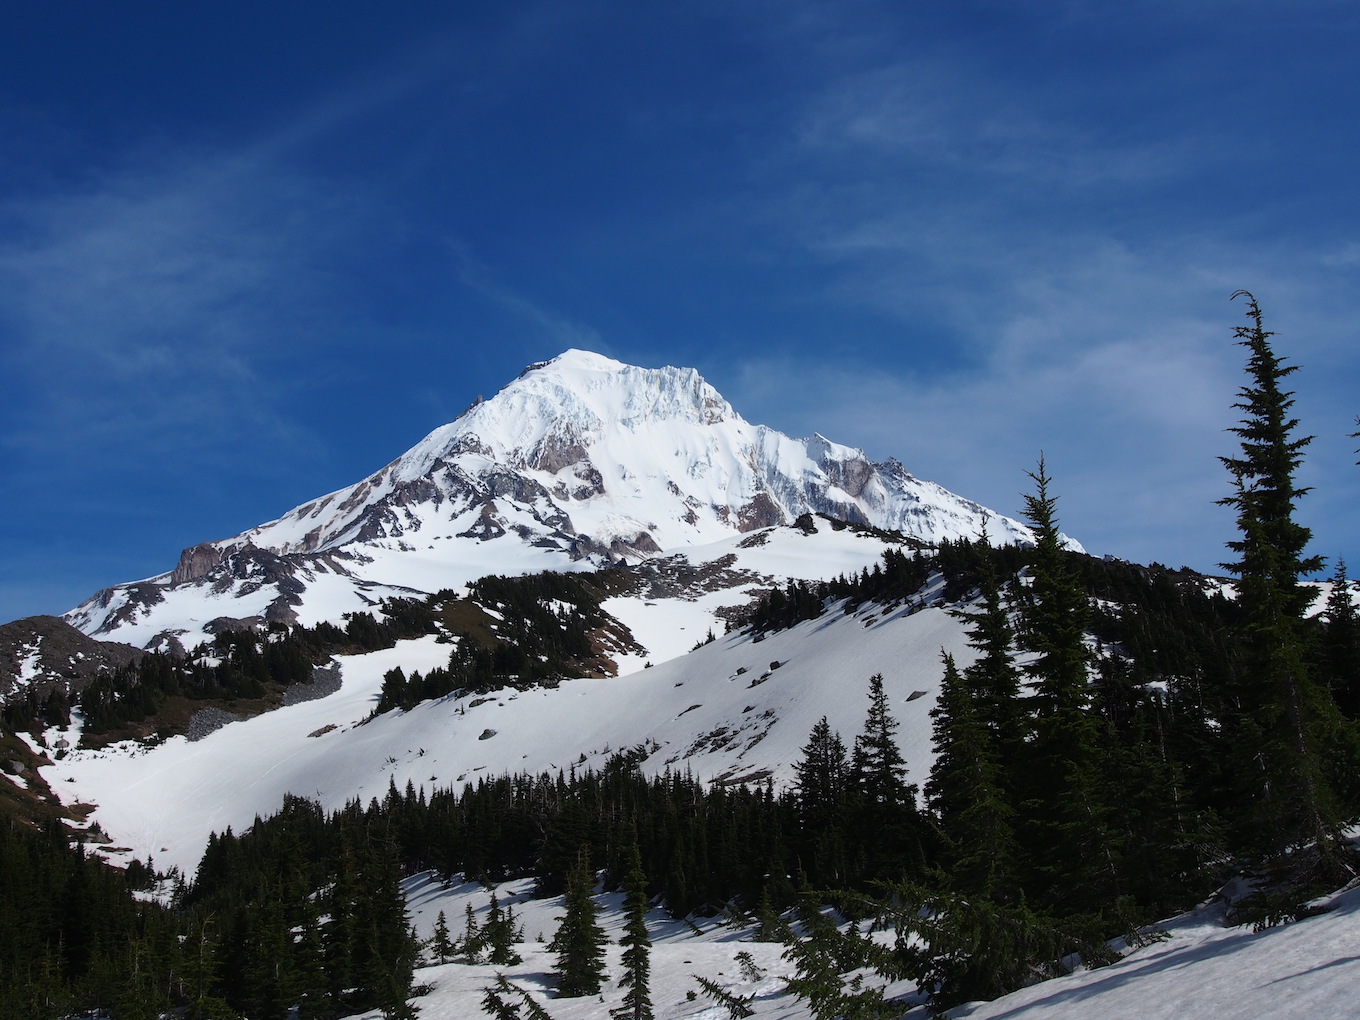 A close-in photo of a snow-covered mountain.